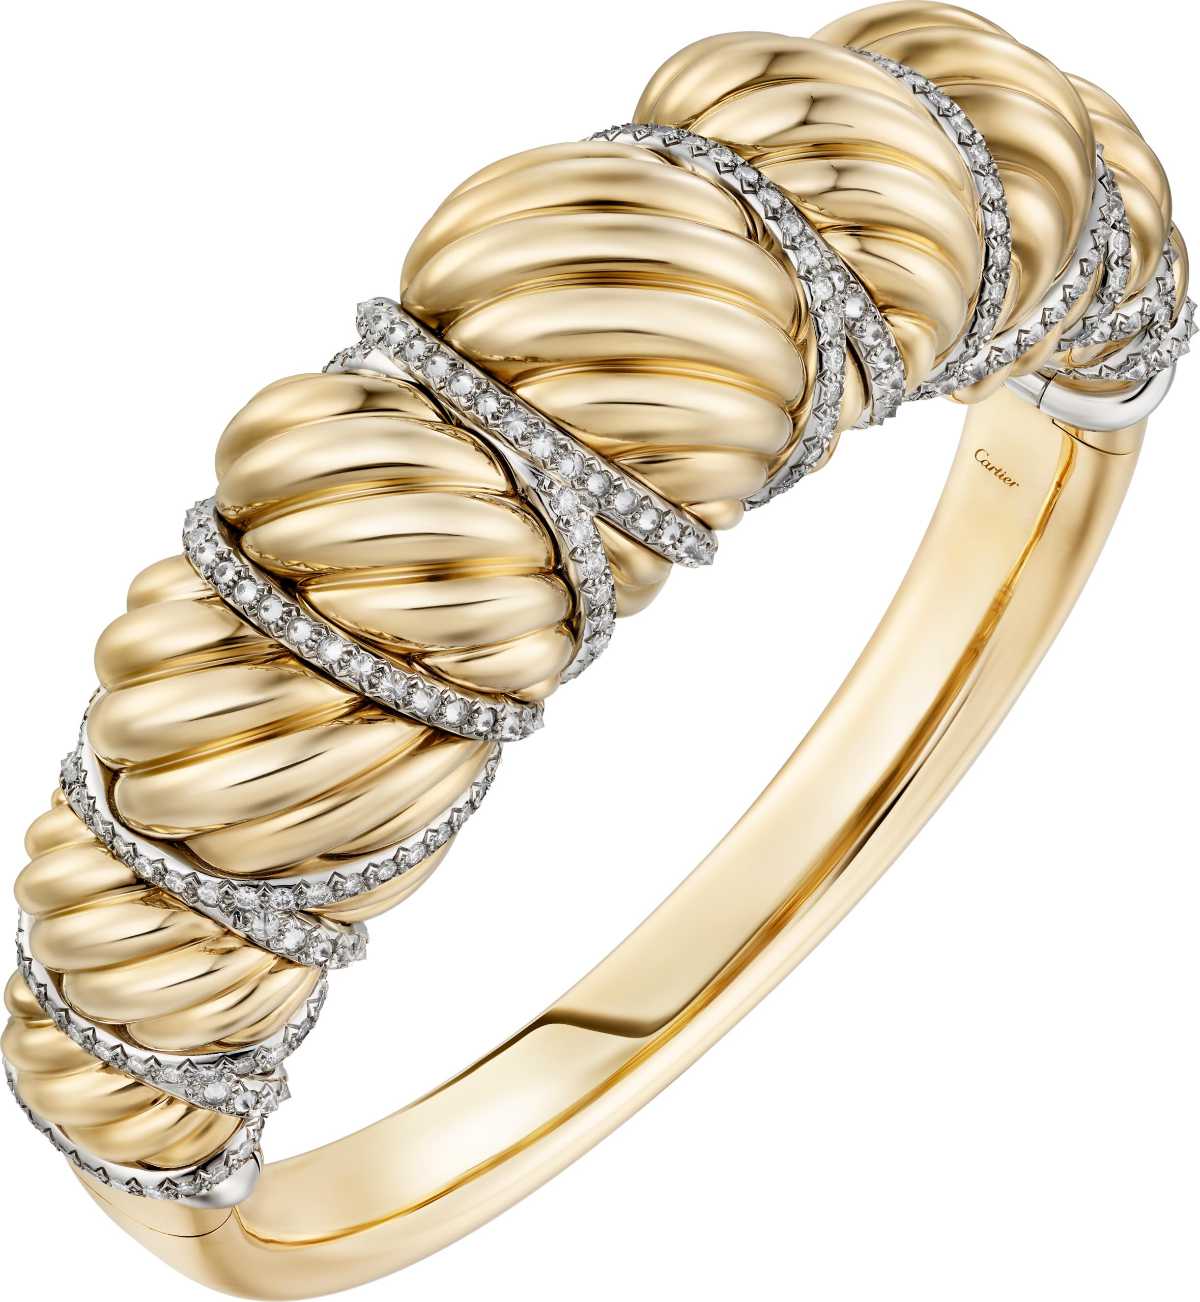 Cartier Presents “Tressage”, An Exceptional Addition To The Libre Collection